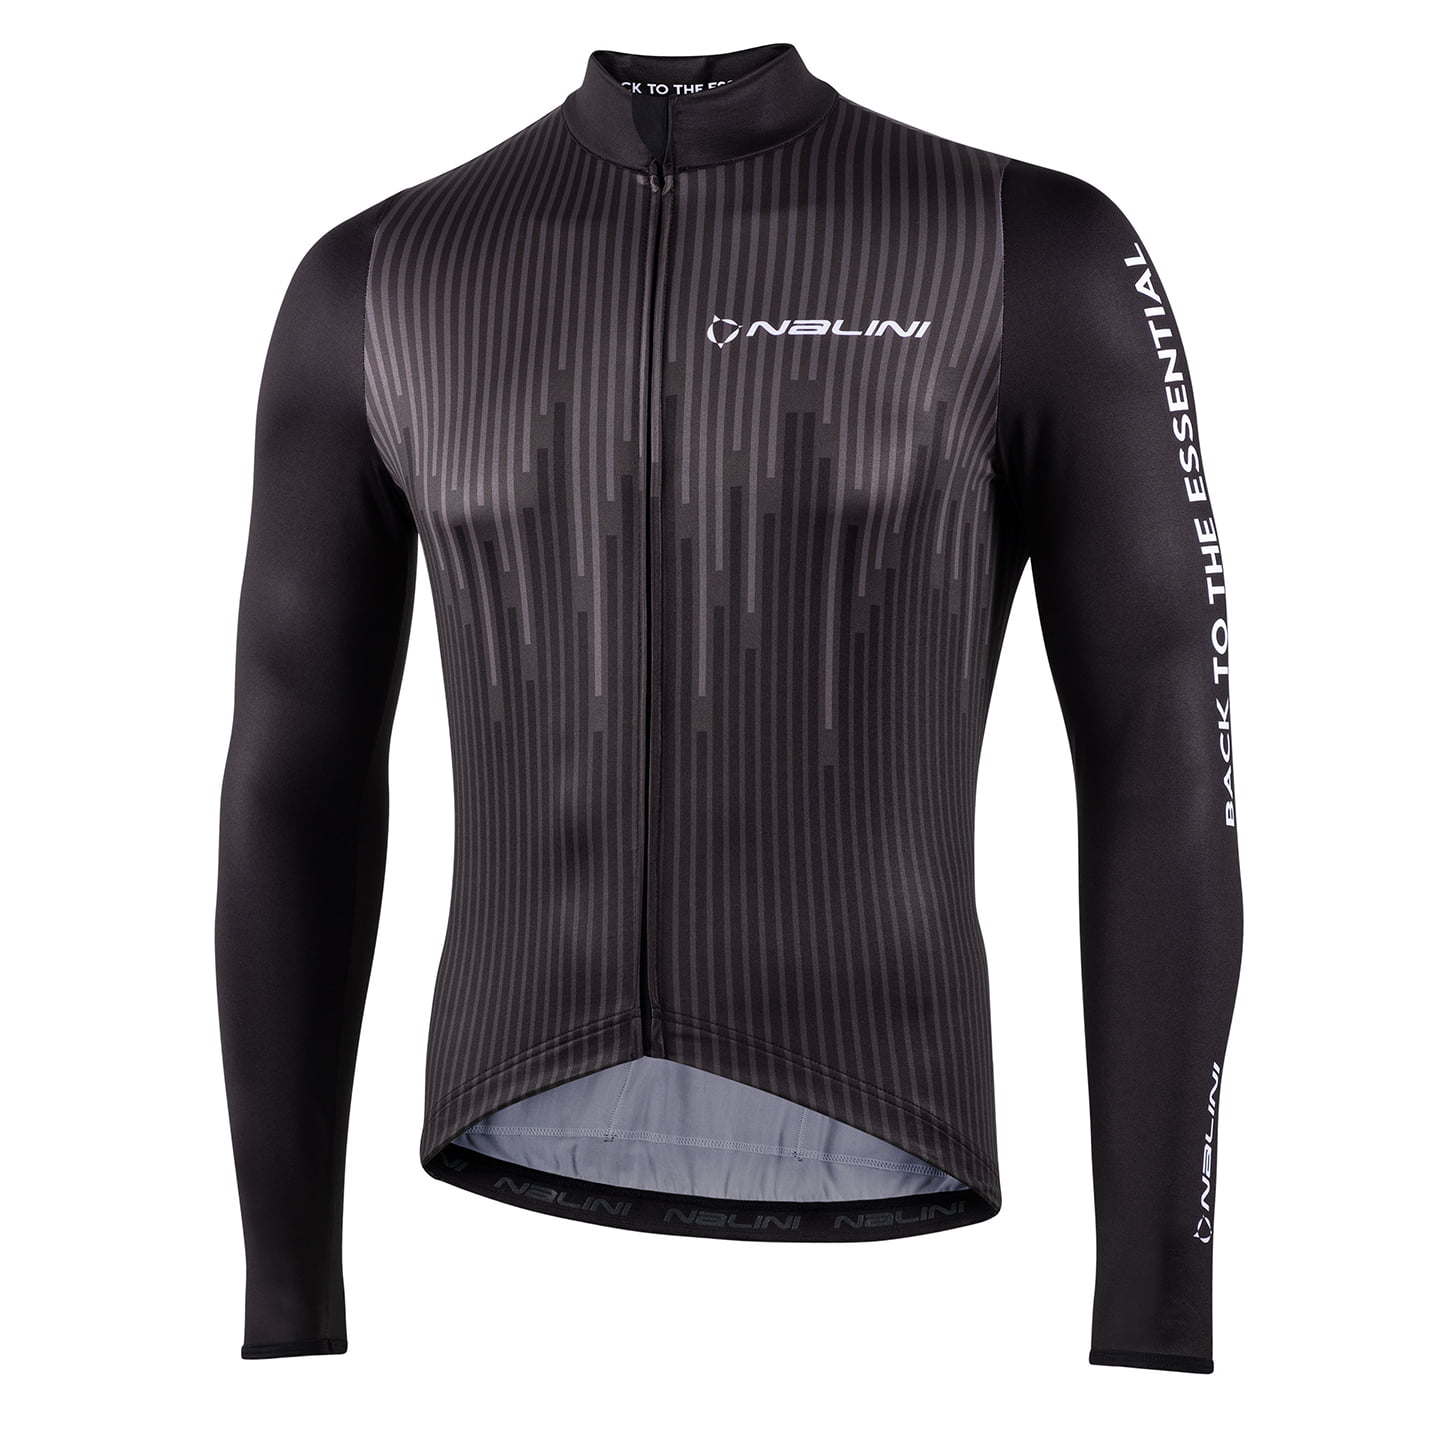 NALINI Fit Long Sleeve Jersey Long Sleeve Jersey, for men, size 3XL, Cycling jersey, Cycle clothing